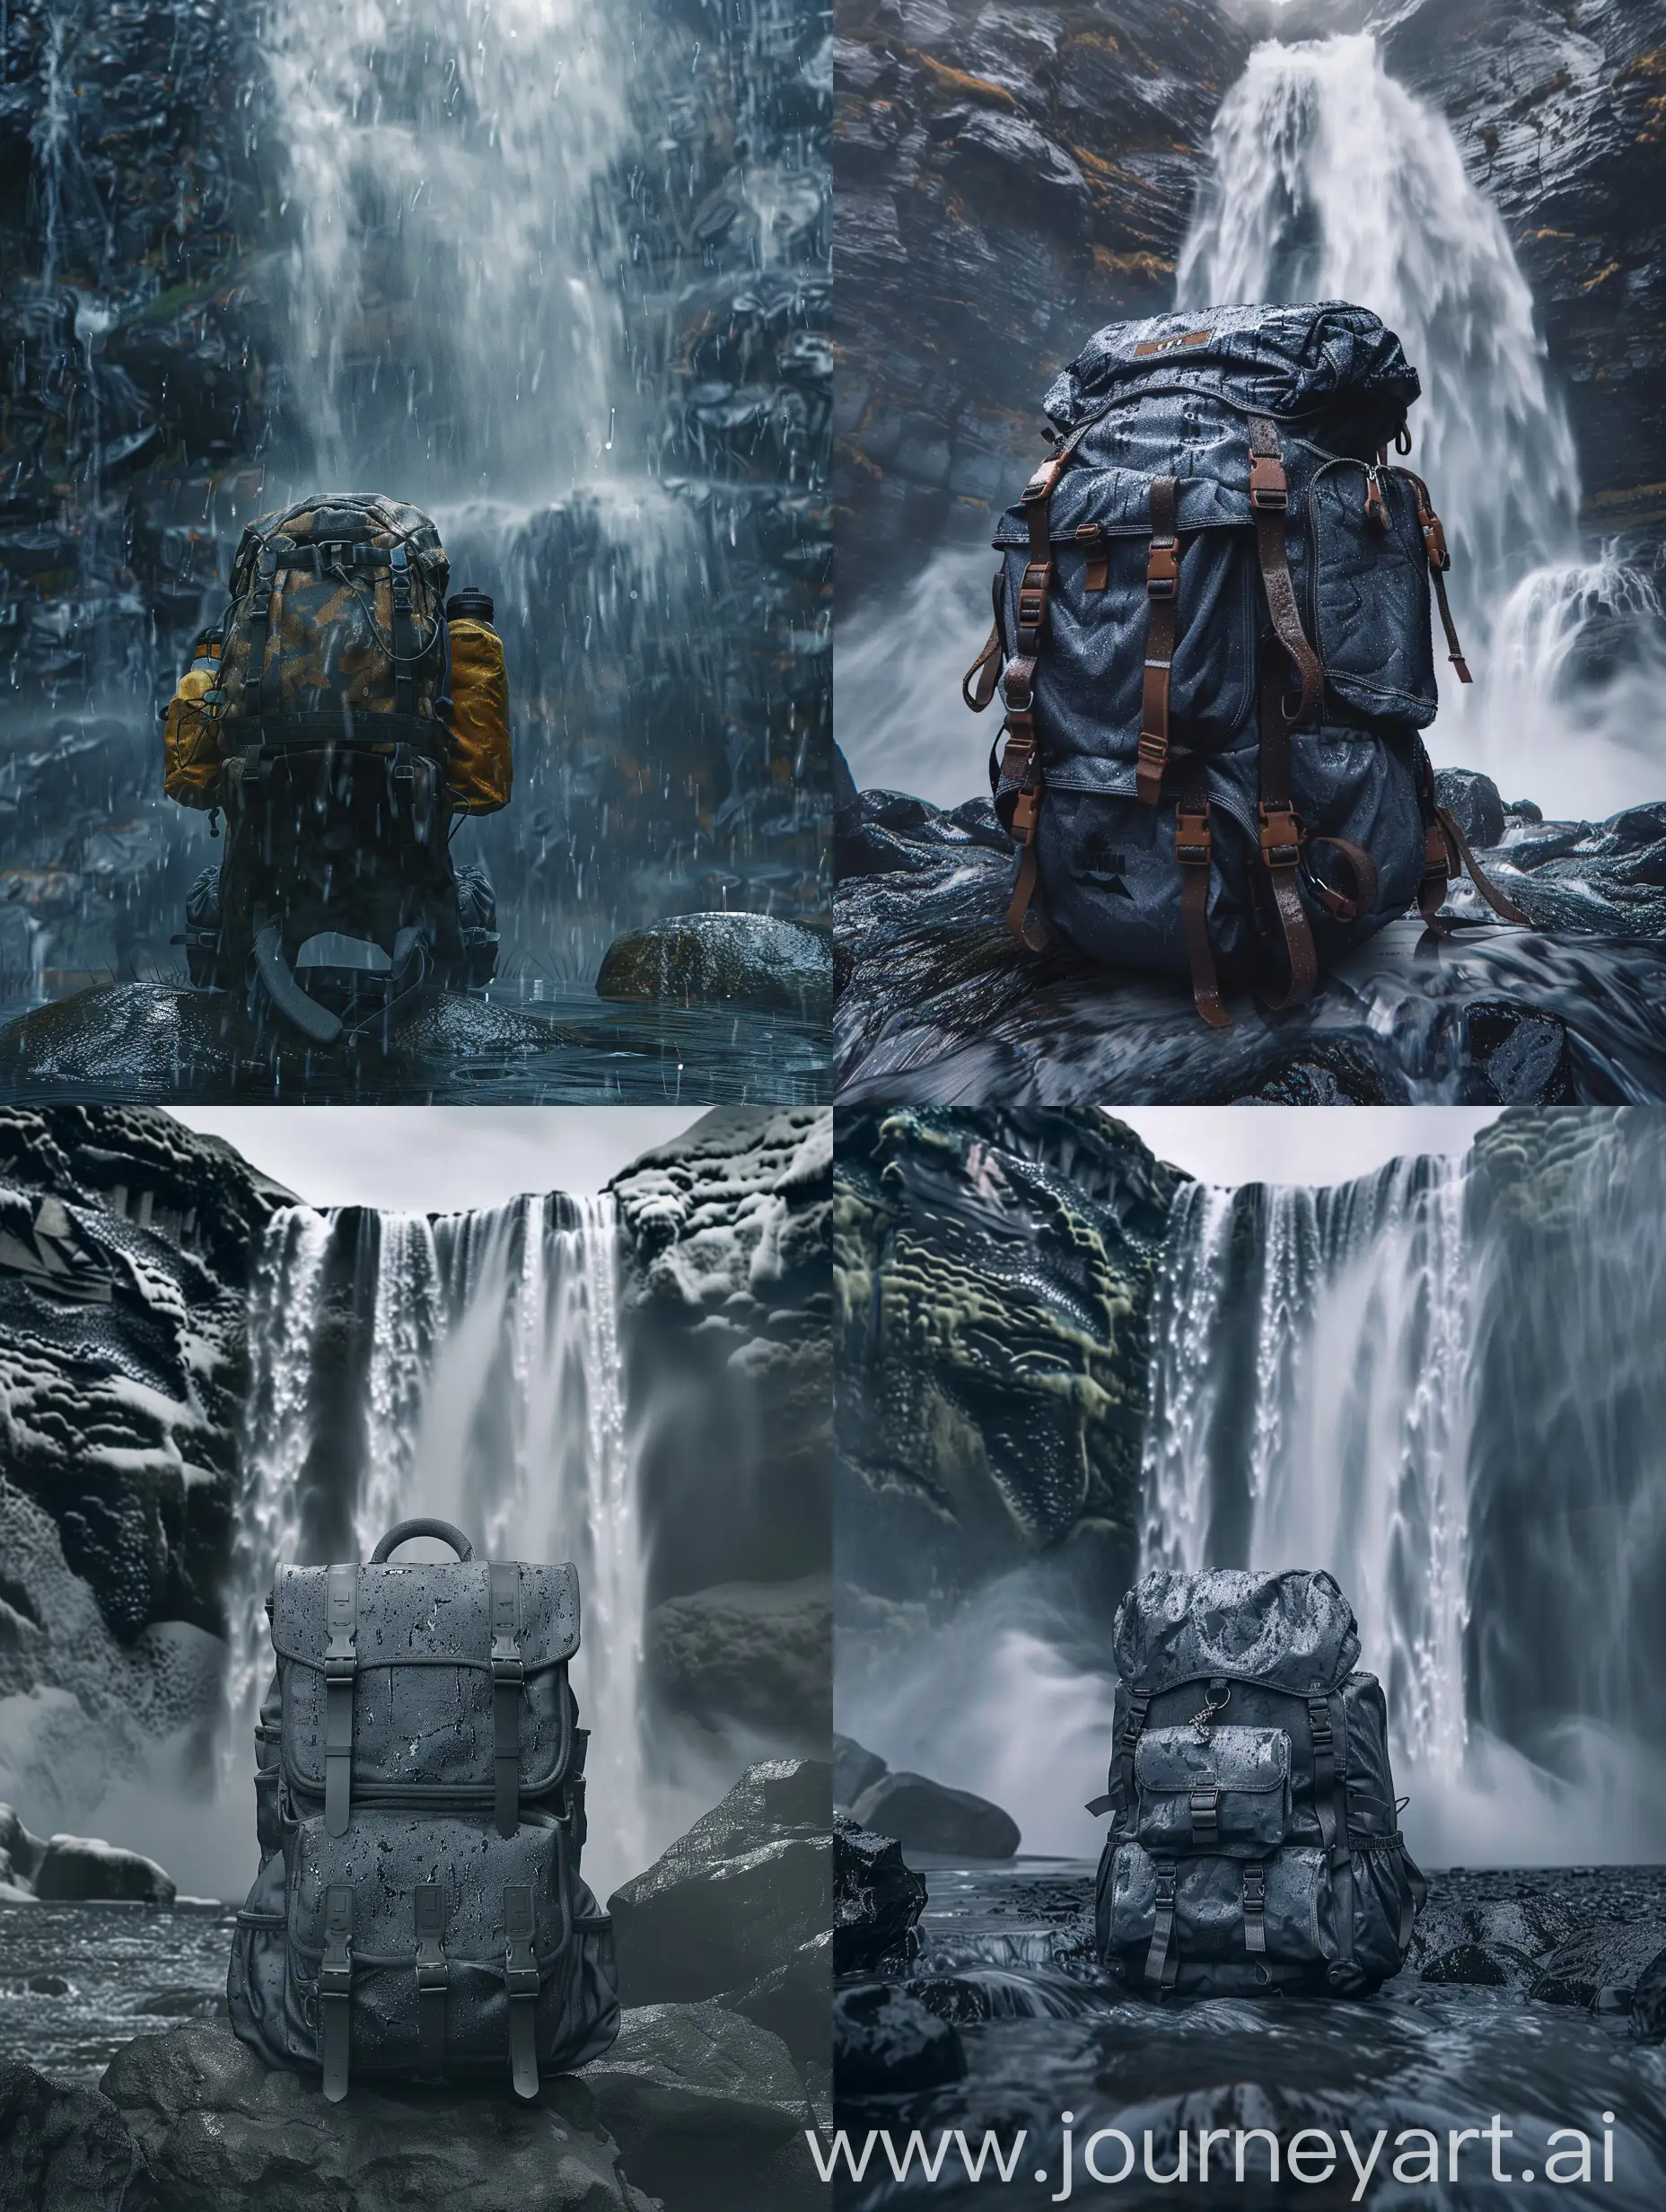 8k, realistic,   a composition showcasing an isolated camping backpack against the backdrop of a cascading waterfall, with intricate textures reflecting the mist and moisture of its 